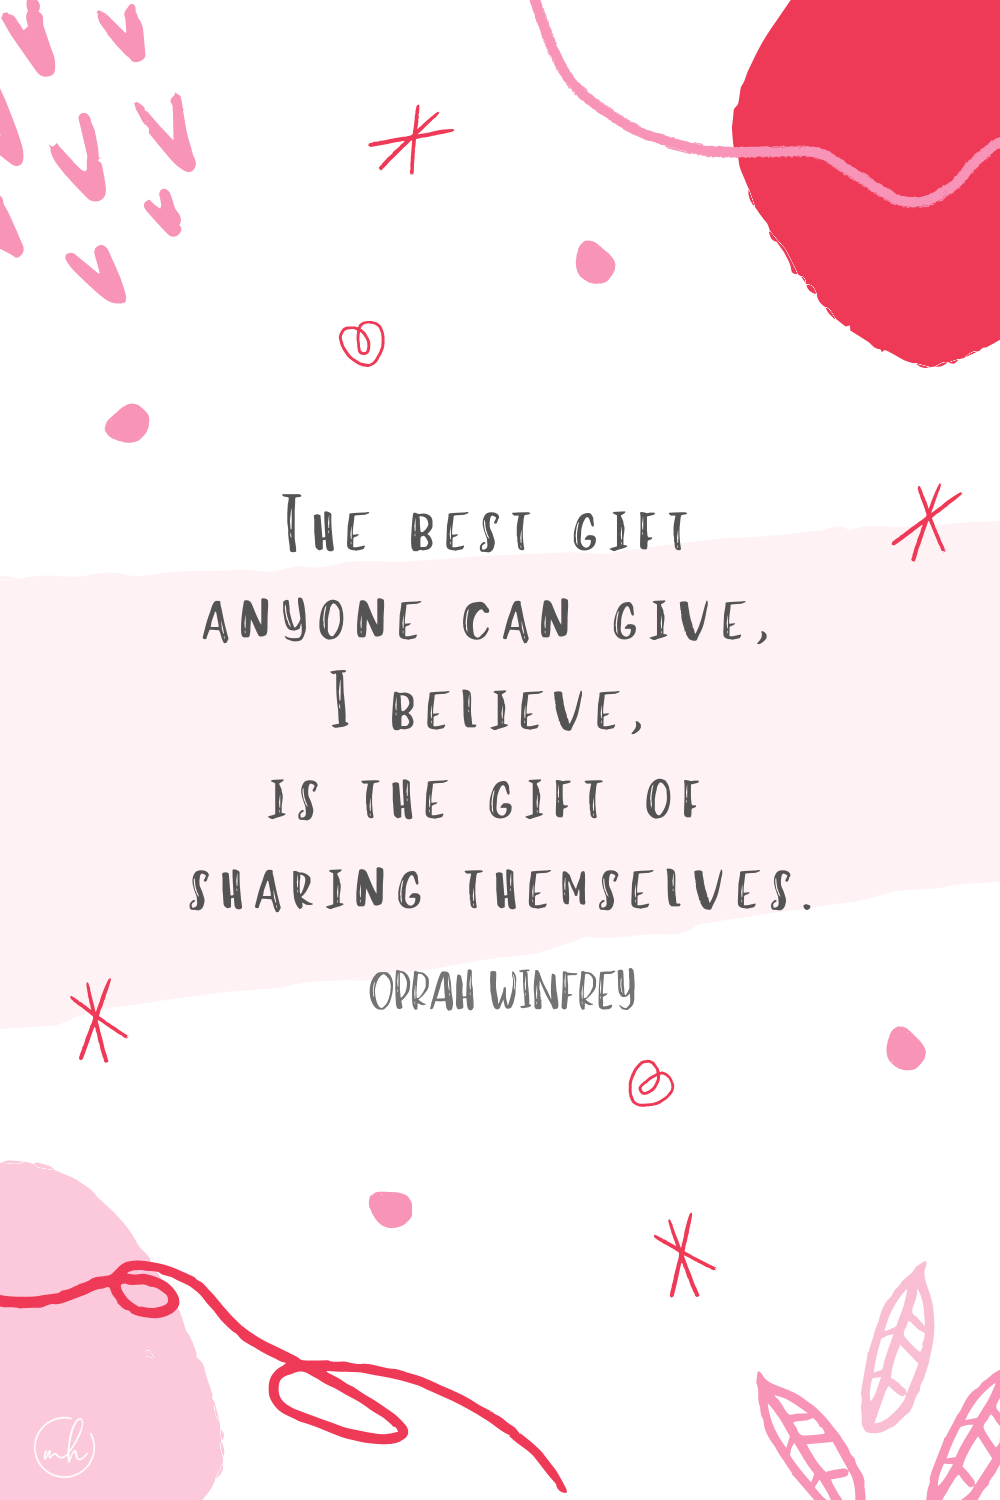 "The best gift anyone can give, I believe, is the gift of sharing themselves." – Oprah Winfrey